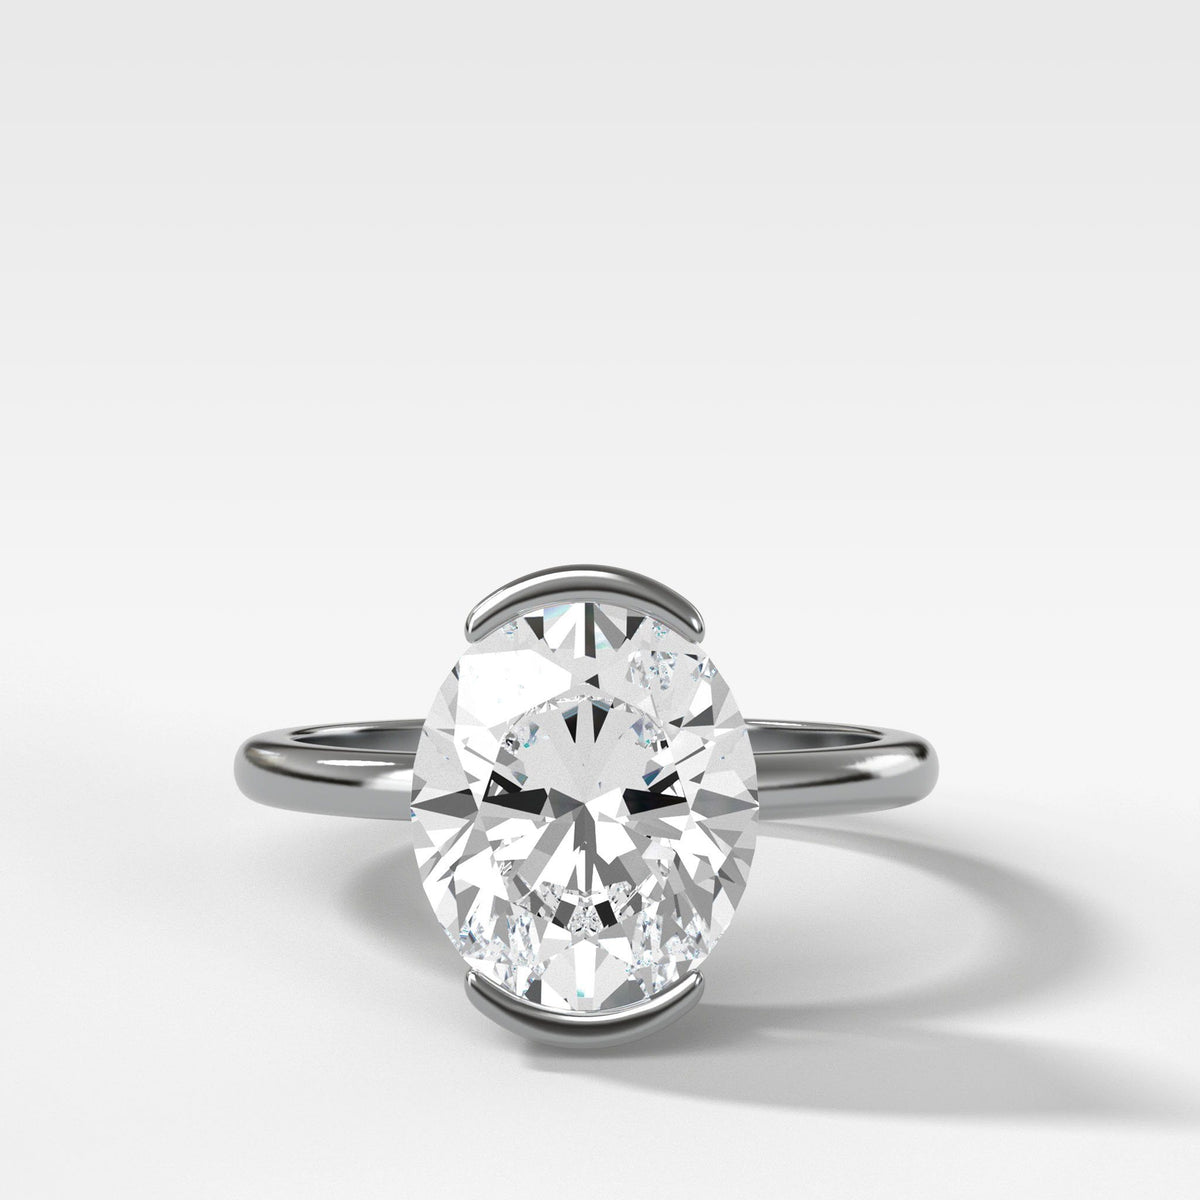 North South Half Bezel Solitaire Engagement Ring With Oval Cut by Good Stone in White Gold